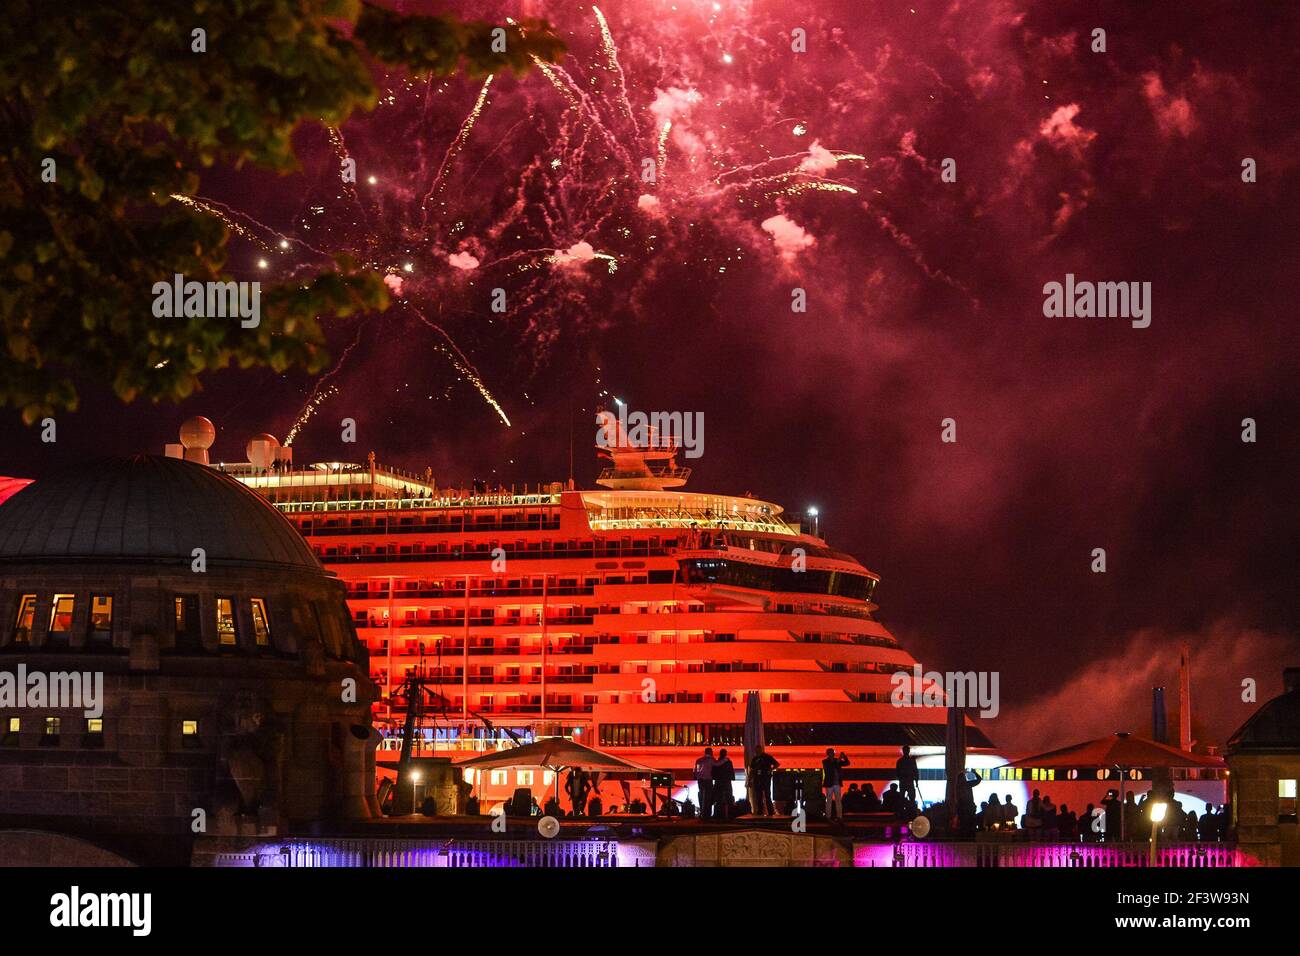 Hamburg. Germany. - May 07, 2016: Hamburg. Germany. City holiday. City festivities. Tourists and types of attractions.Fireworks fireworks at the port on a cruise ship Stock Photo